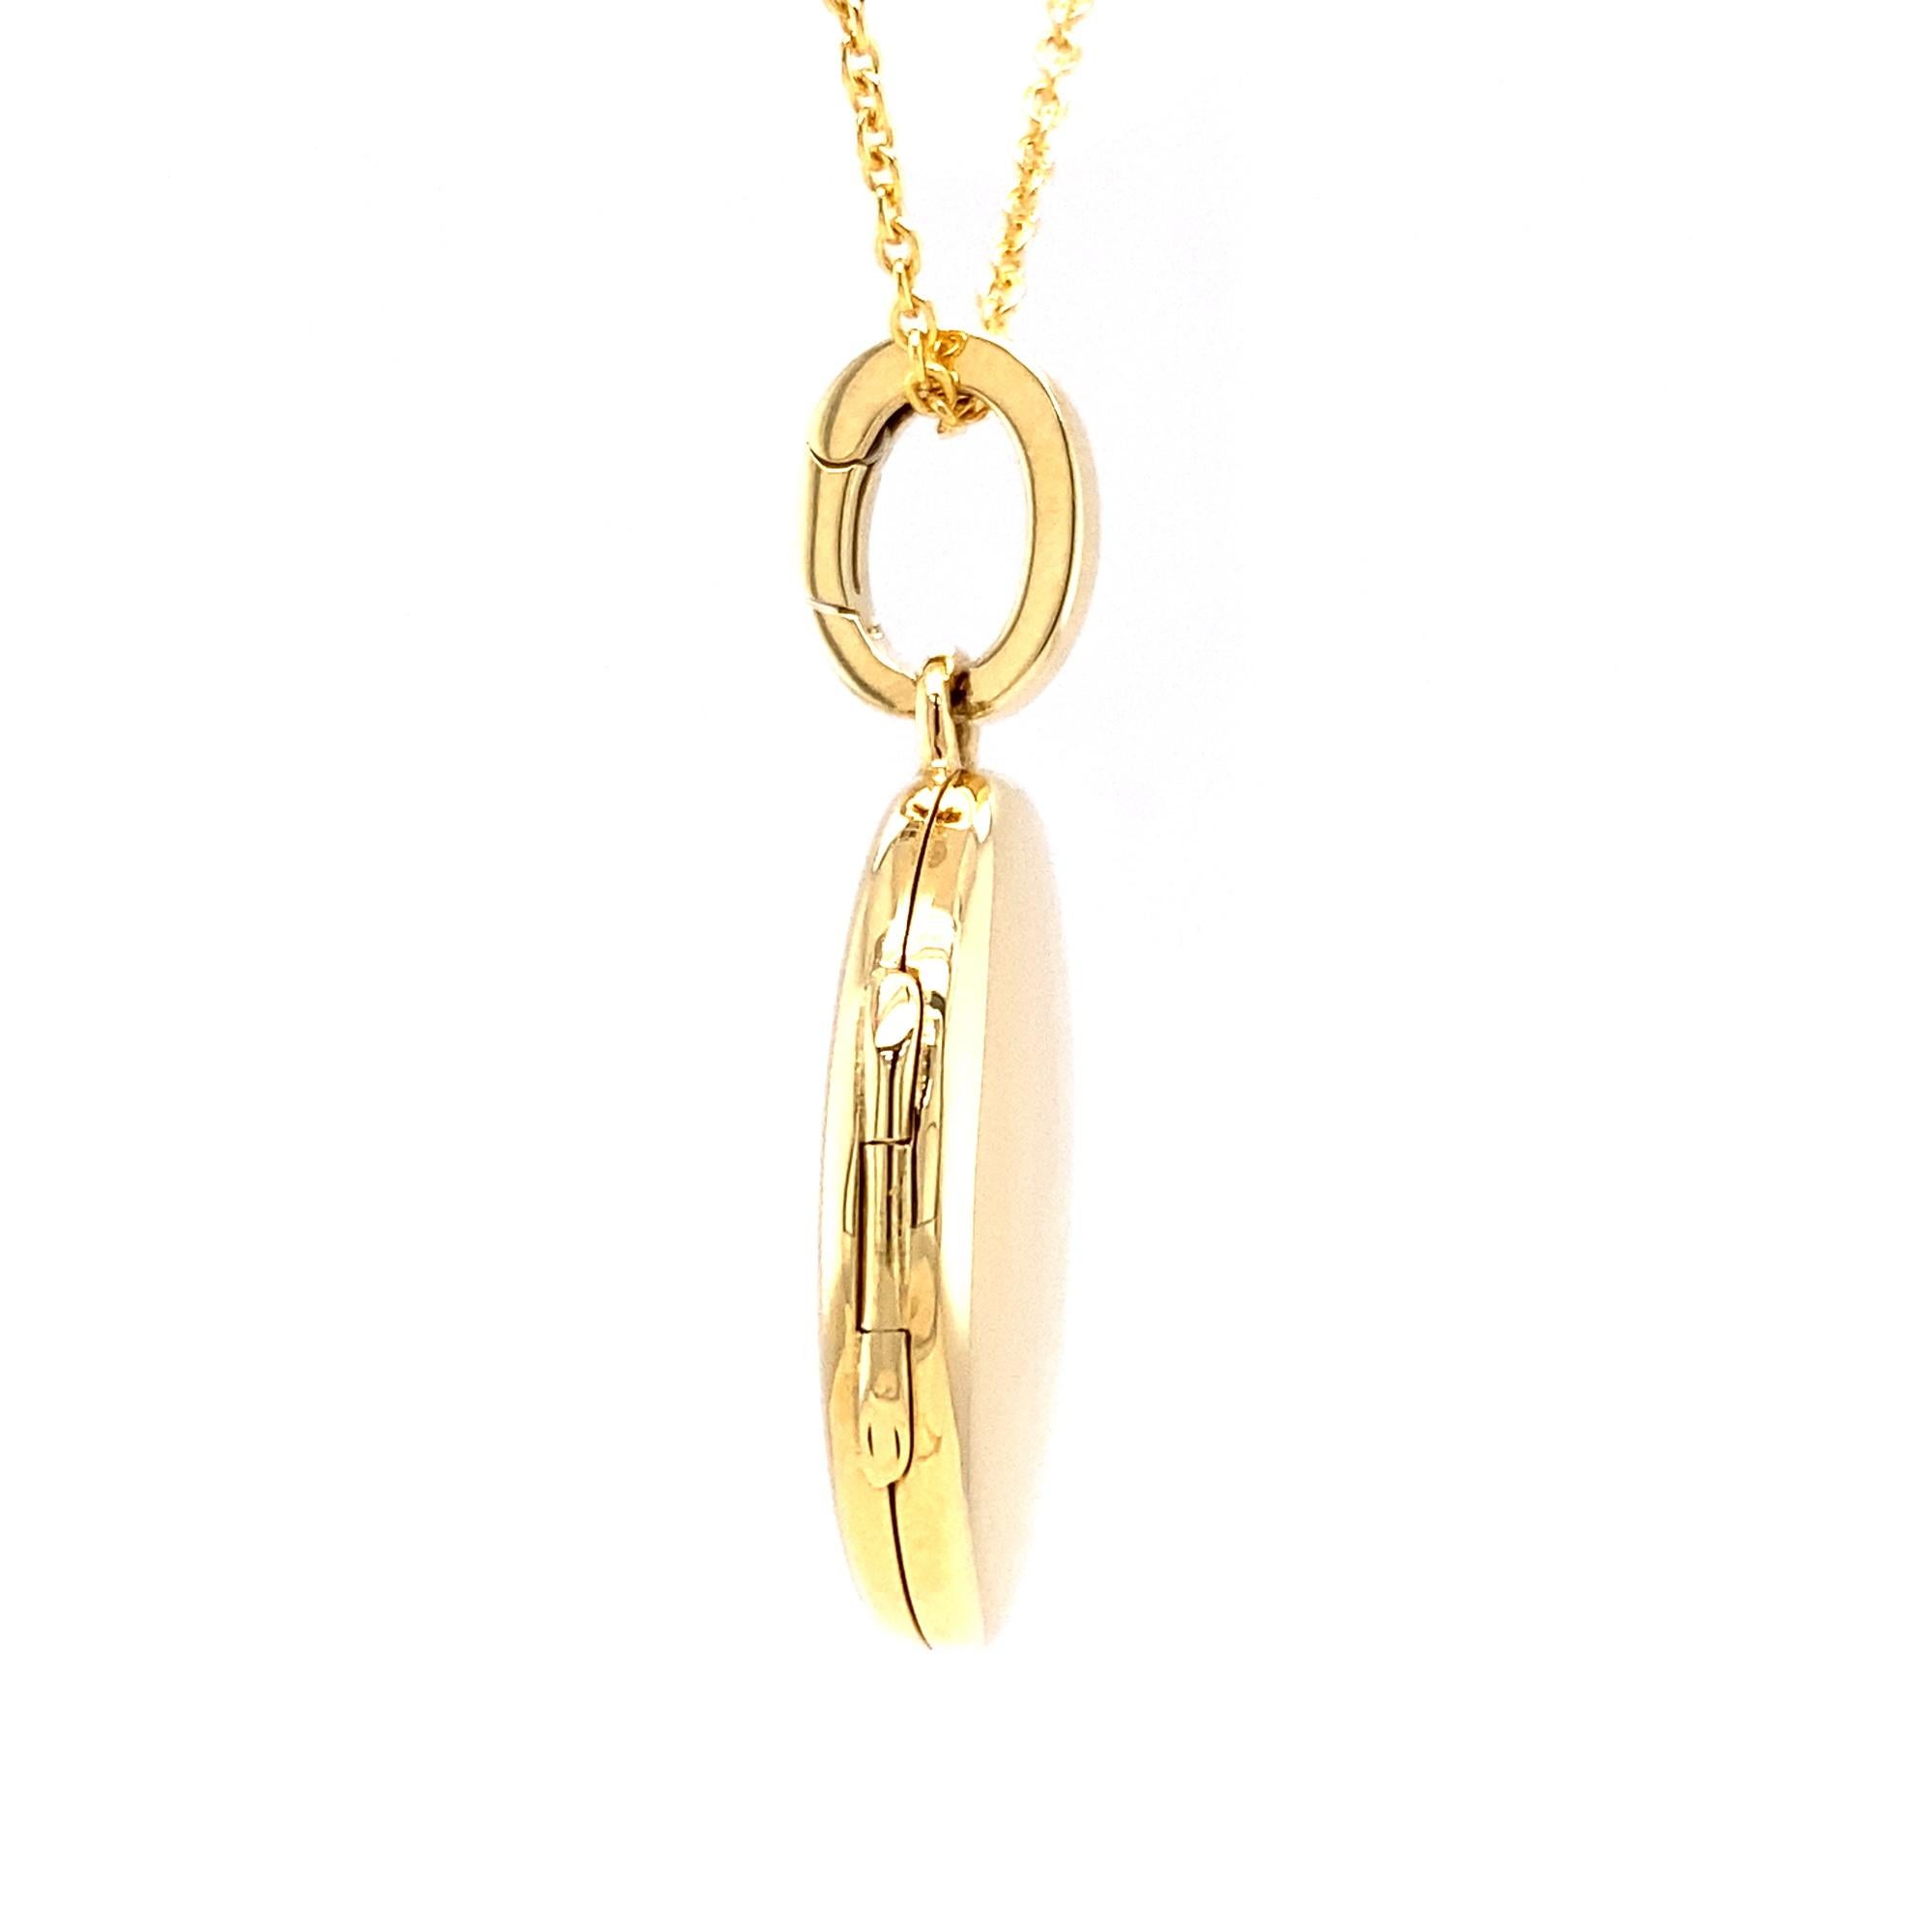 Customizable Oval Polished Pendant Locket Necklace 18k Yellow Gold 23 mm x 20 mm In New Condition For Sale In Pforzheim, DE